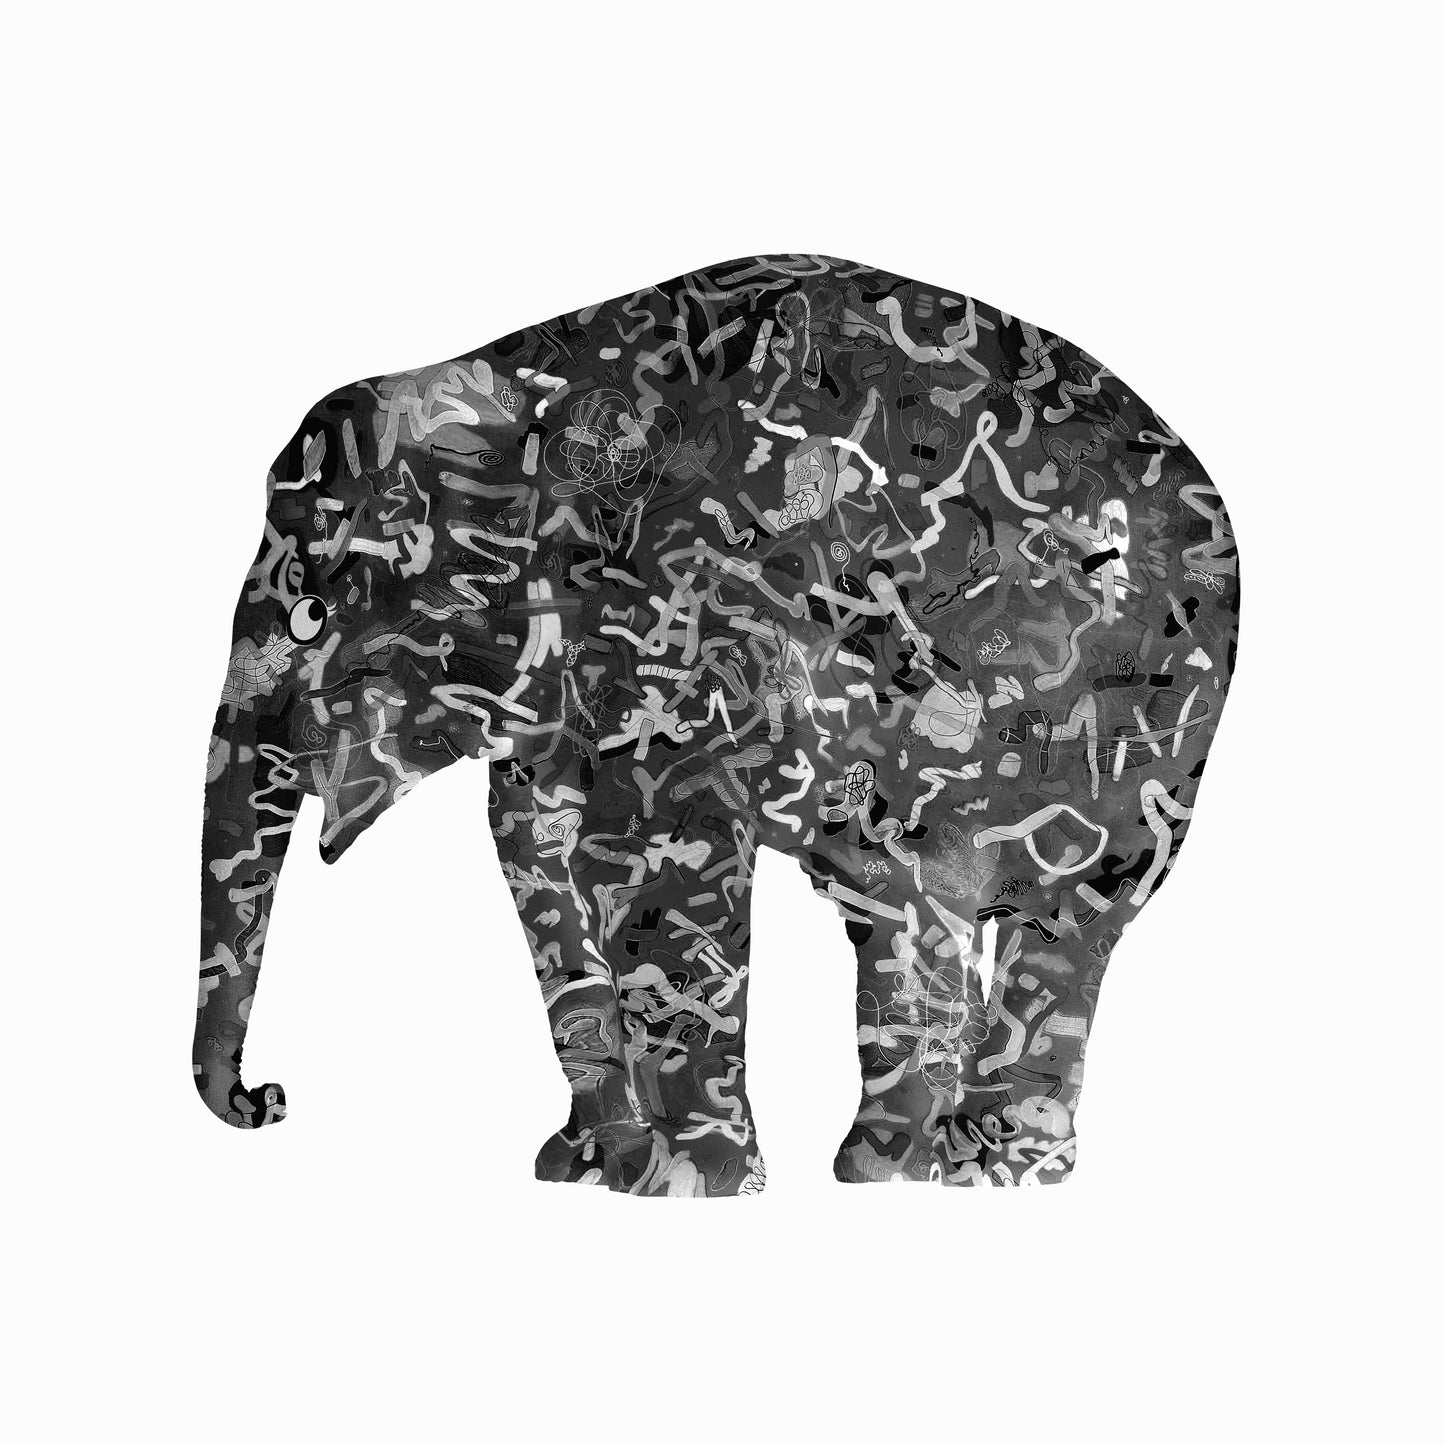 The Migthy Elephants, White R